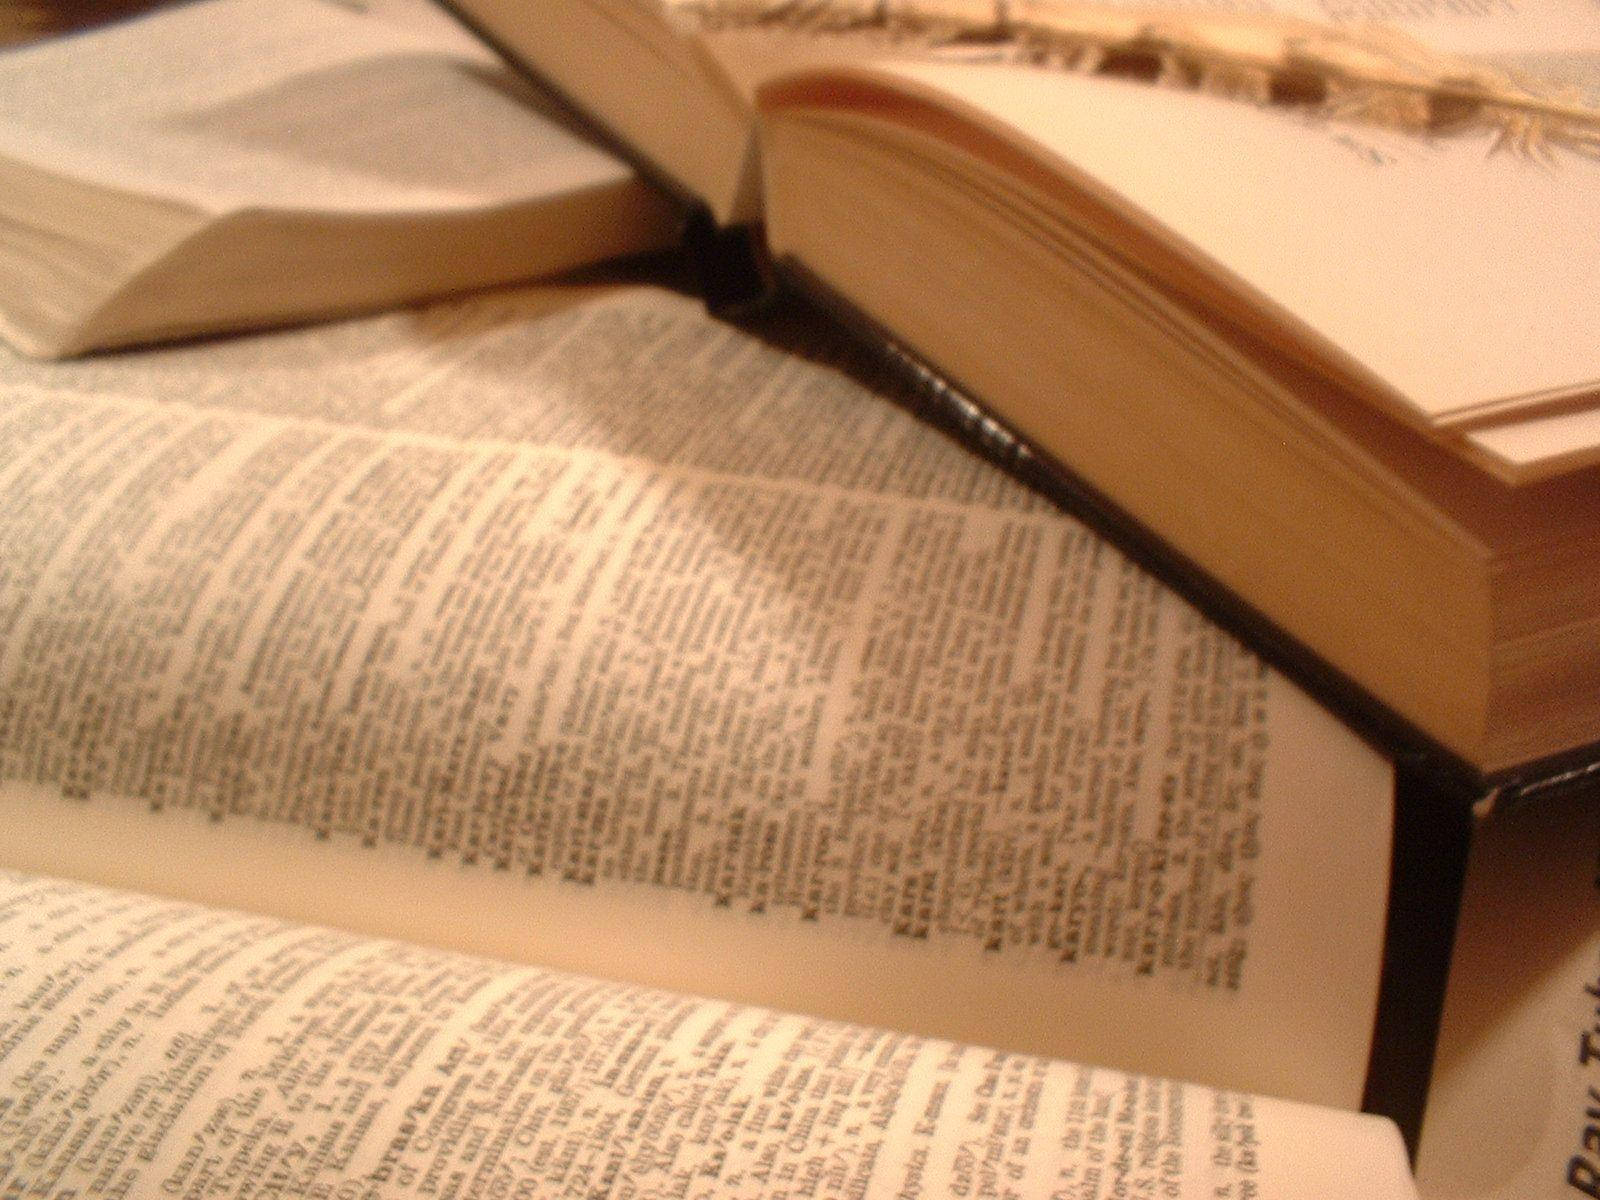 Opened Thick Dictionary Books Wallpaper